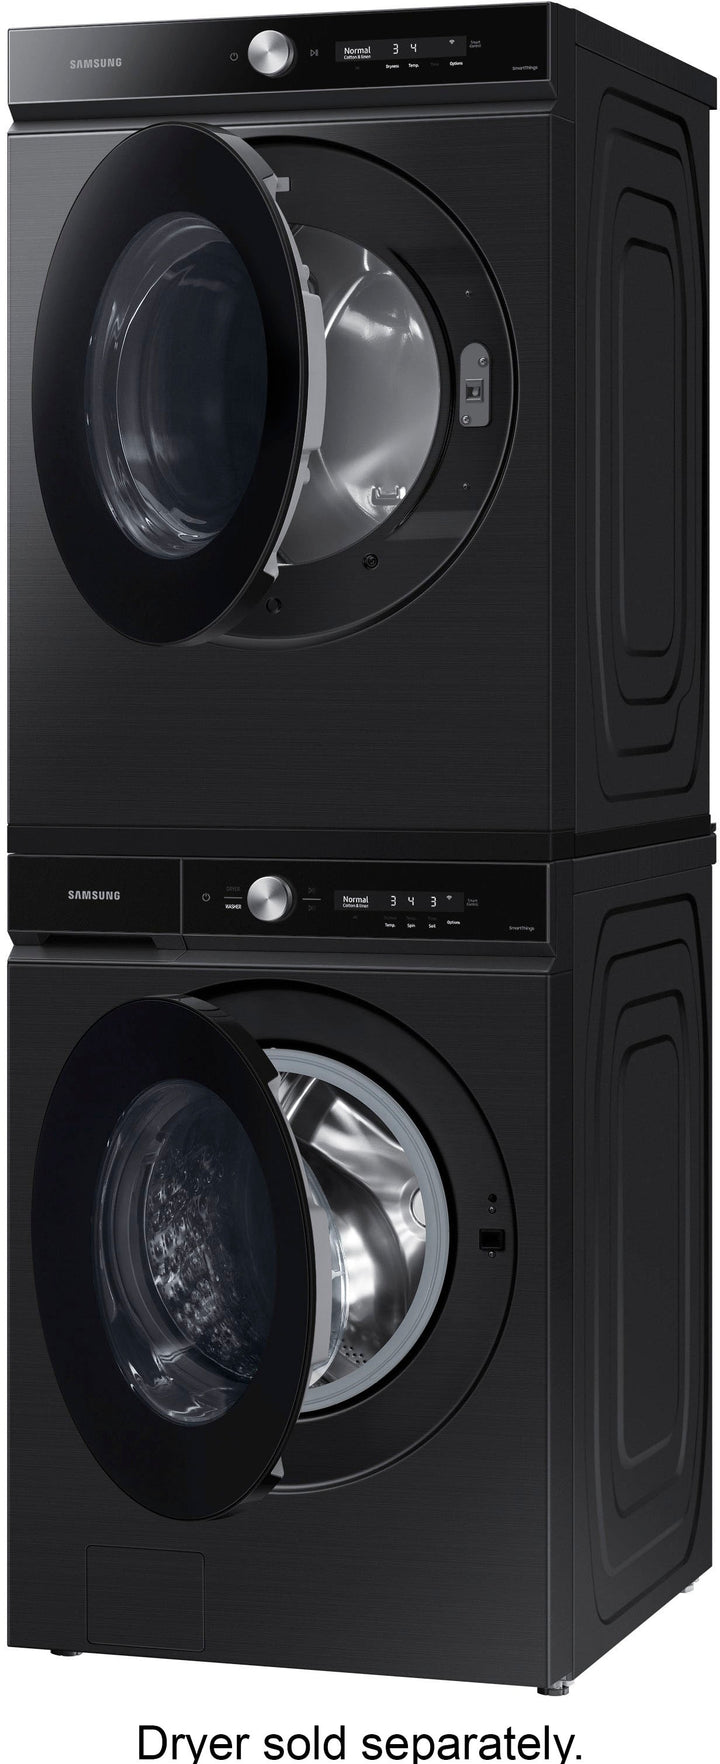 Samsung - Bespoke 5.3 cu. ft. Ultra Capacity Front Load Washer with Super Speed Wash and AI Smart Dial - Brushed black_9